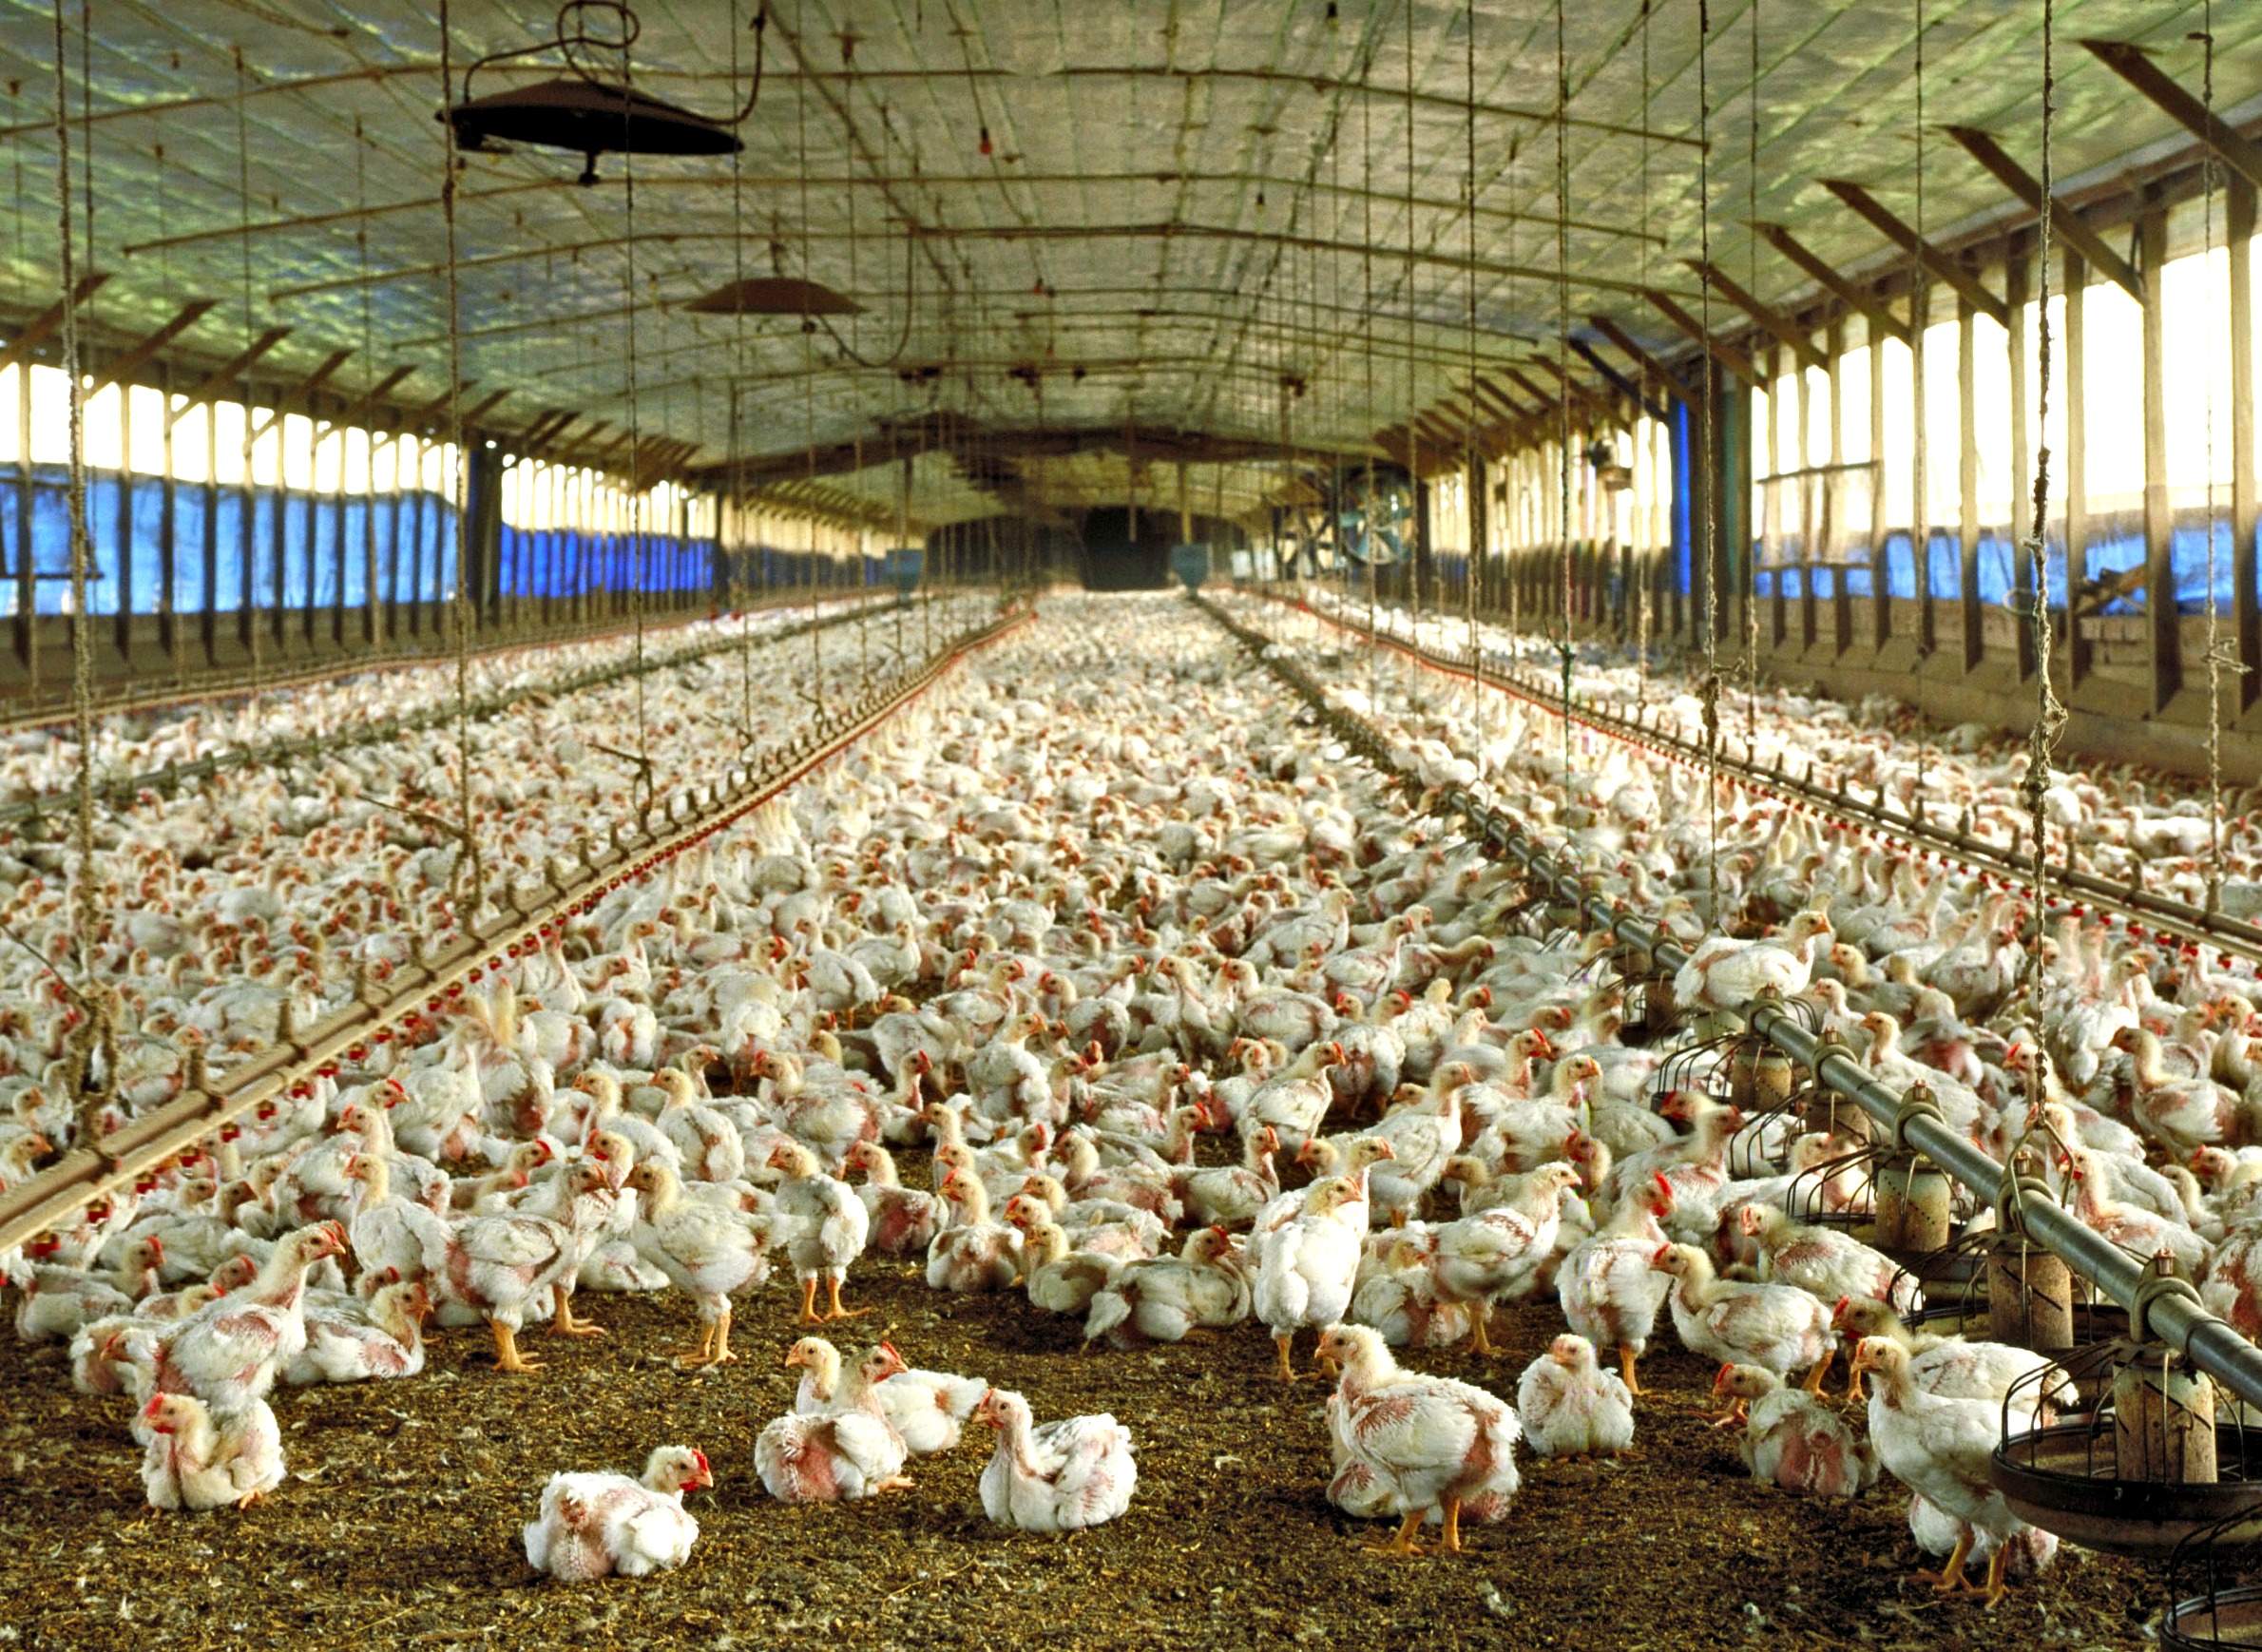 A poultry barn floor covered by young chickens